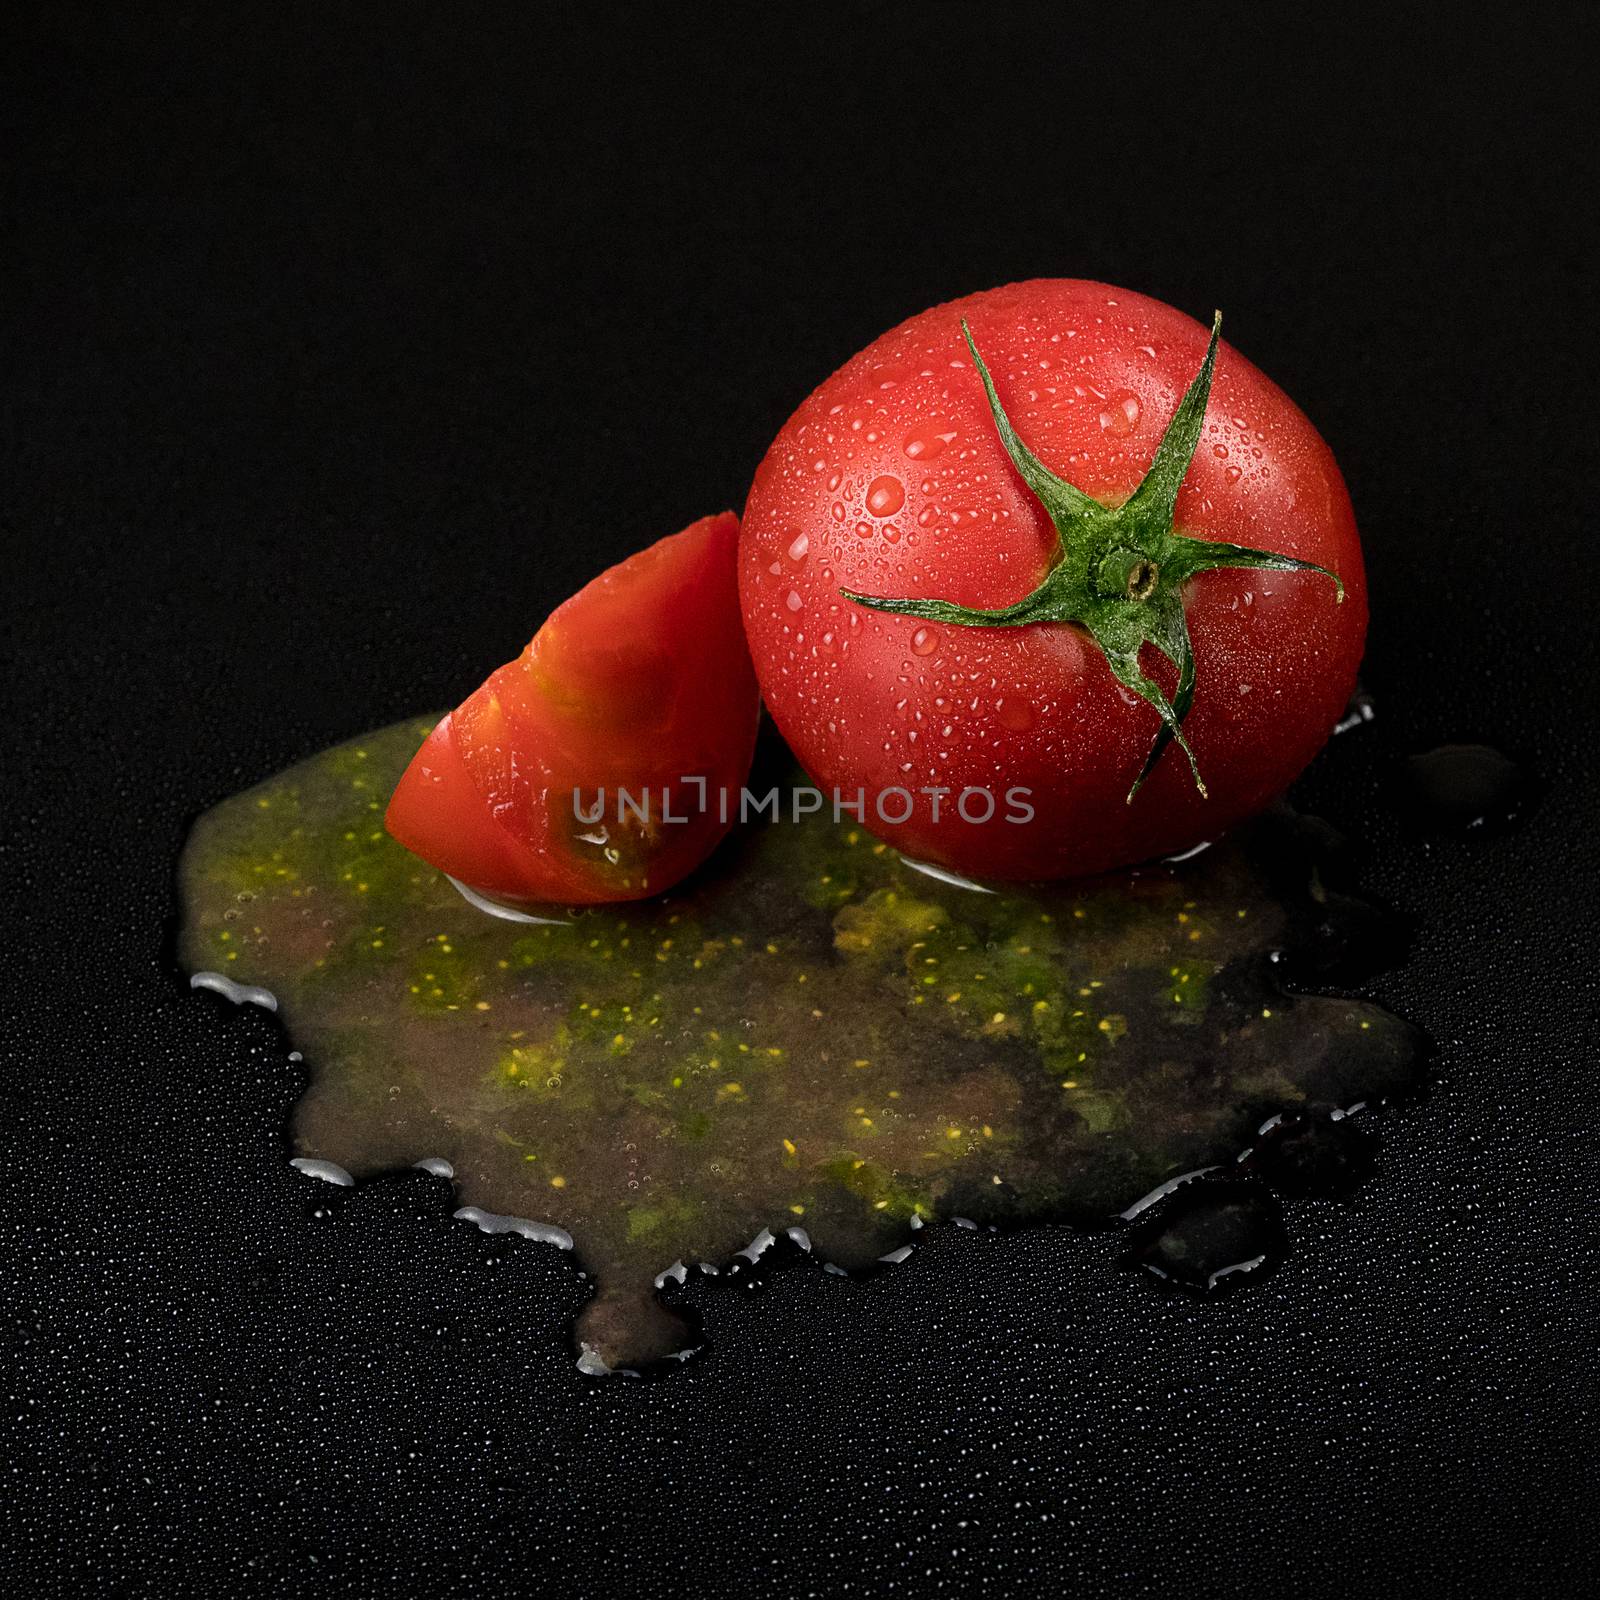 fresh wet tomatoes on a black background. sliced tomatoes with pulp